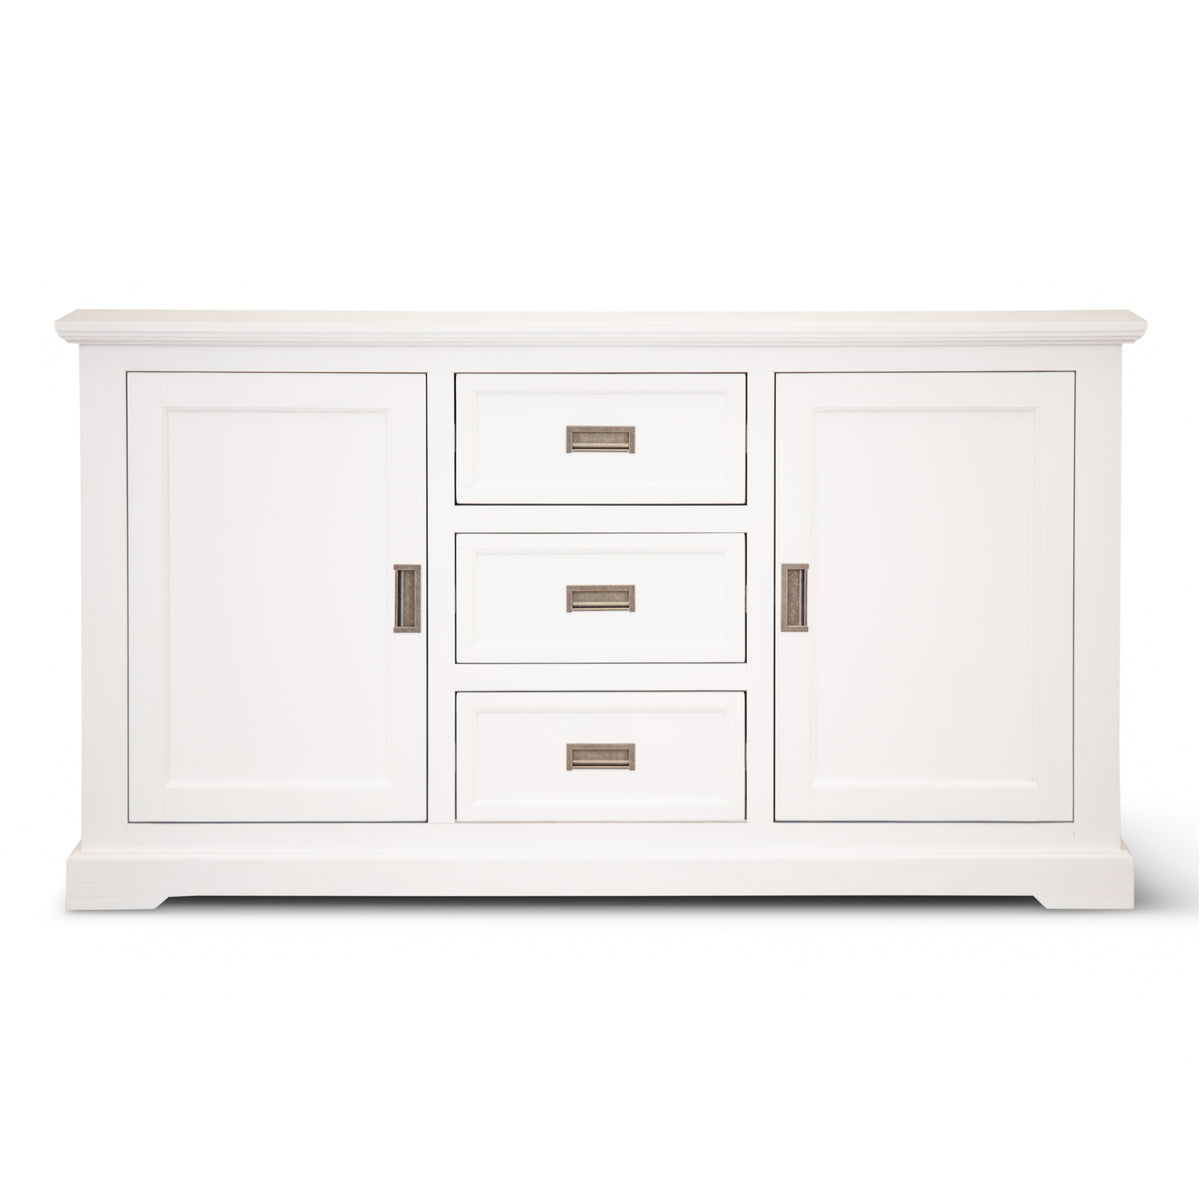 Laelia Buffet Table with 2 Door 3 Drawer Acacia Wood Coastal Furniture in White - 166cm - Notbrand